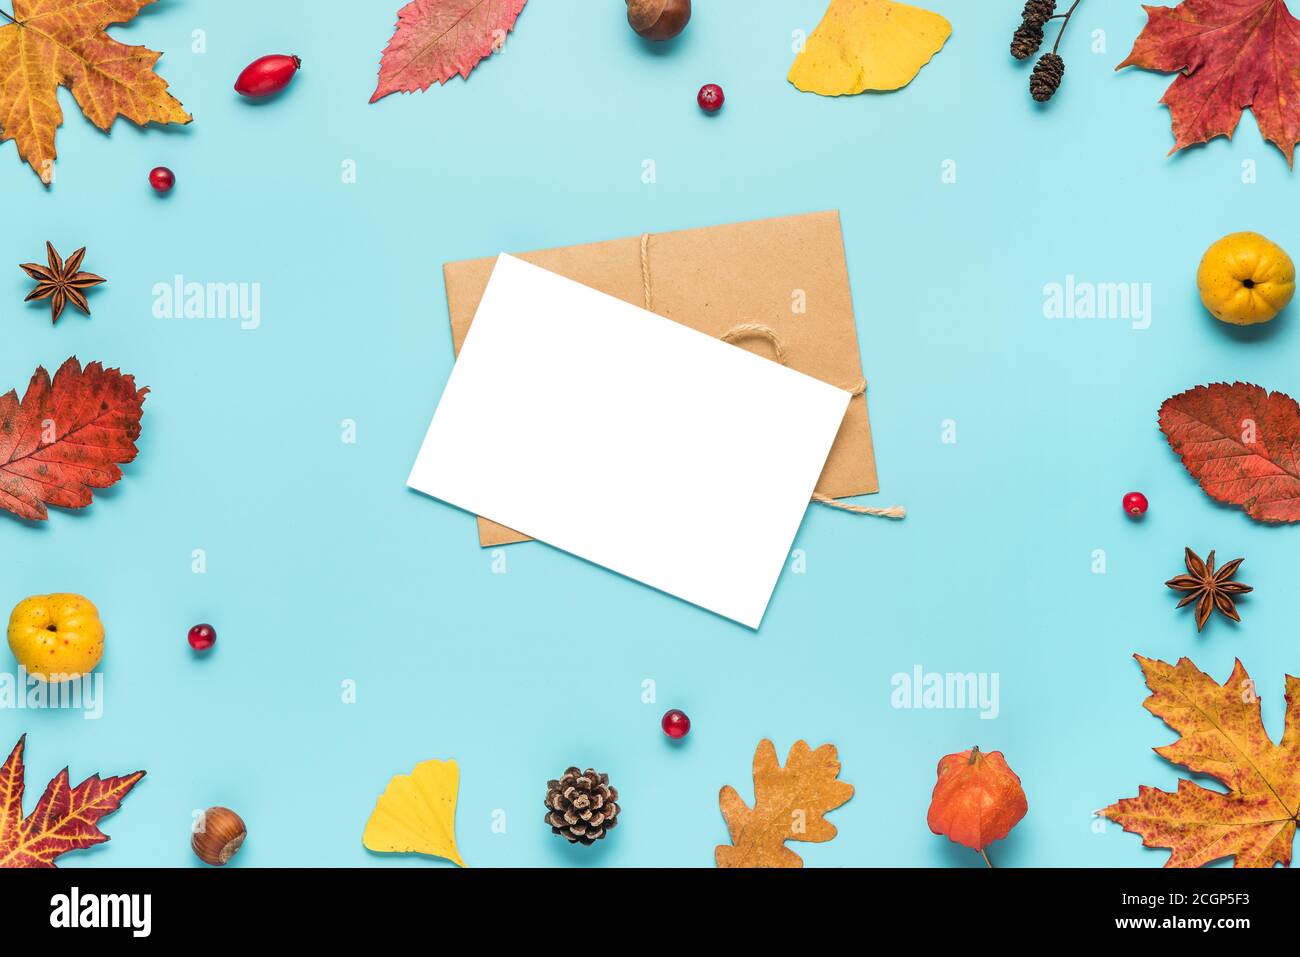 https://c8.alamy.com/comp/2CGP5F3/thanksgiving-autumn-greeting-card-or-invitation-dried-leaves-flowers-nuts-berries-on-blue-background-flat-lay-mock-up-top-view-with-copy-space-2CGP5F3.jpg